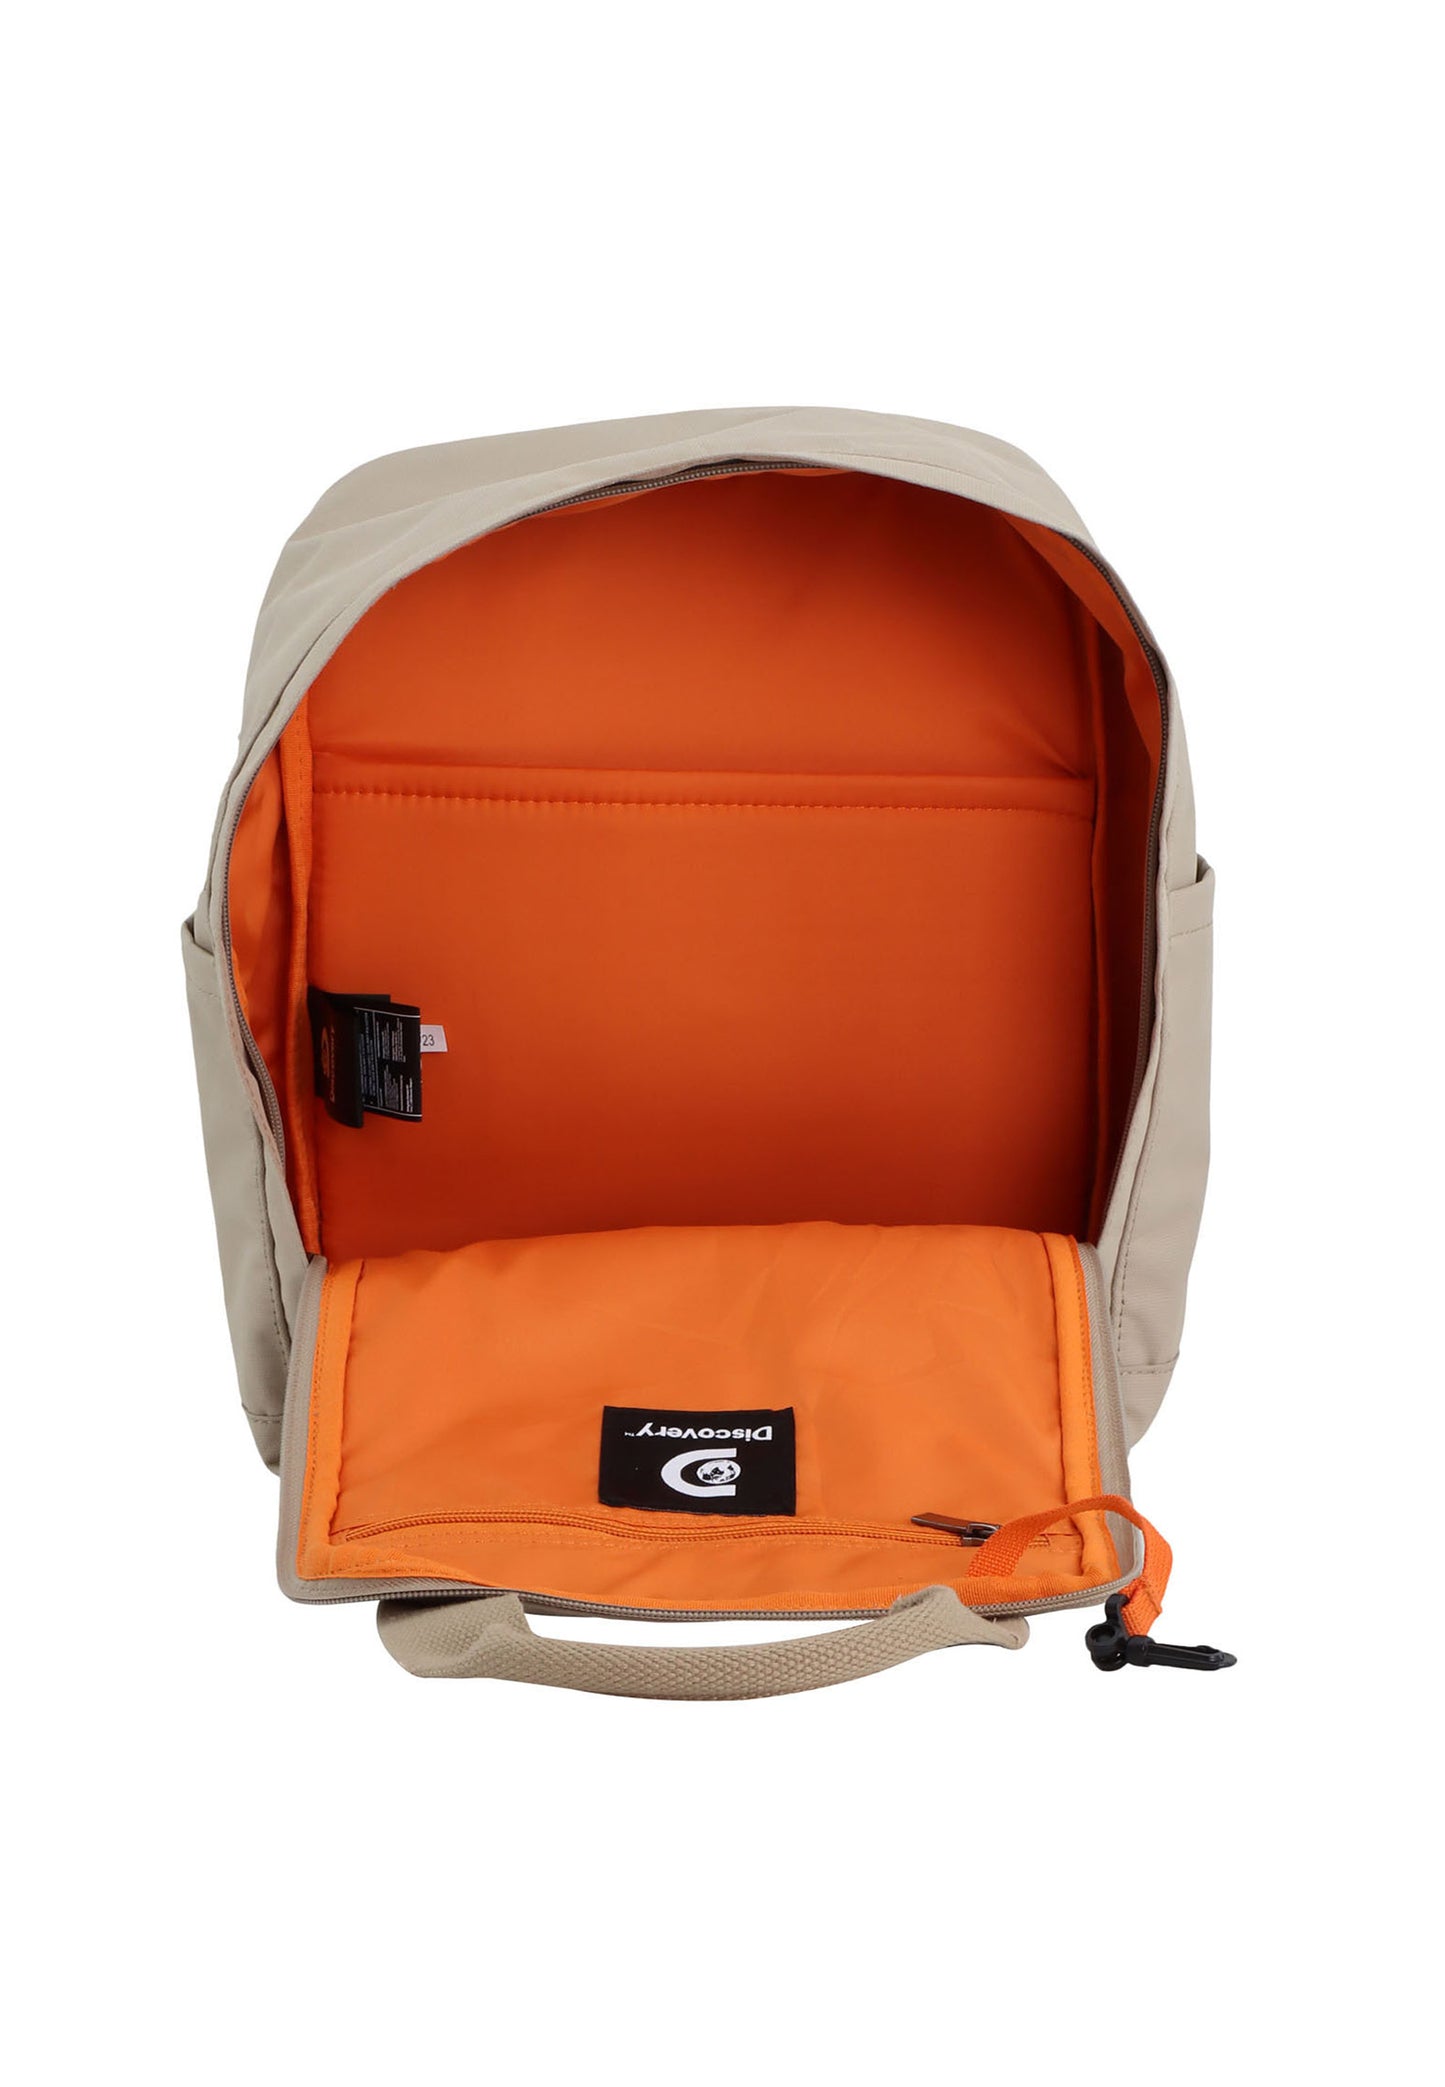 Discovery Cave Small Rugzak / Schooltas Sand